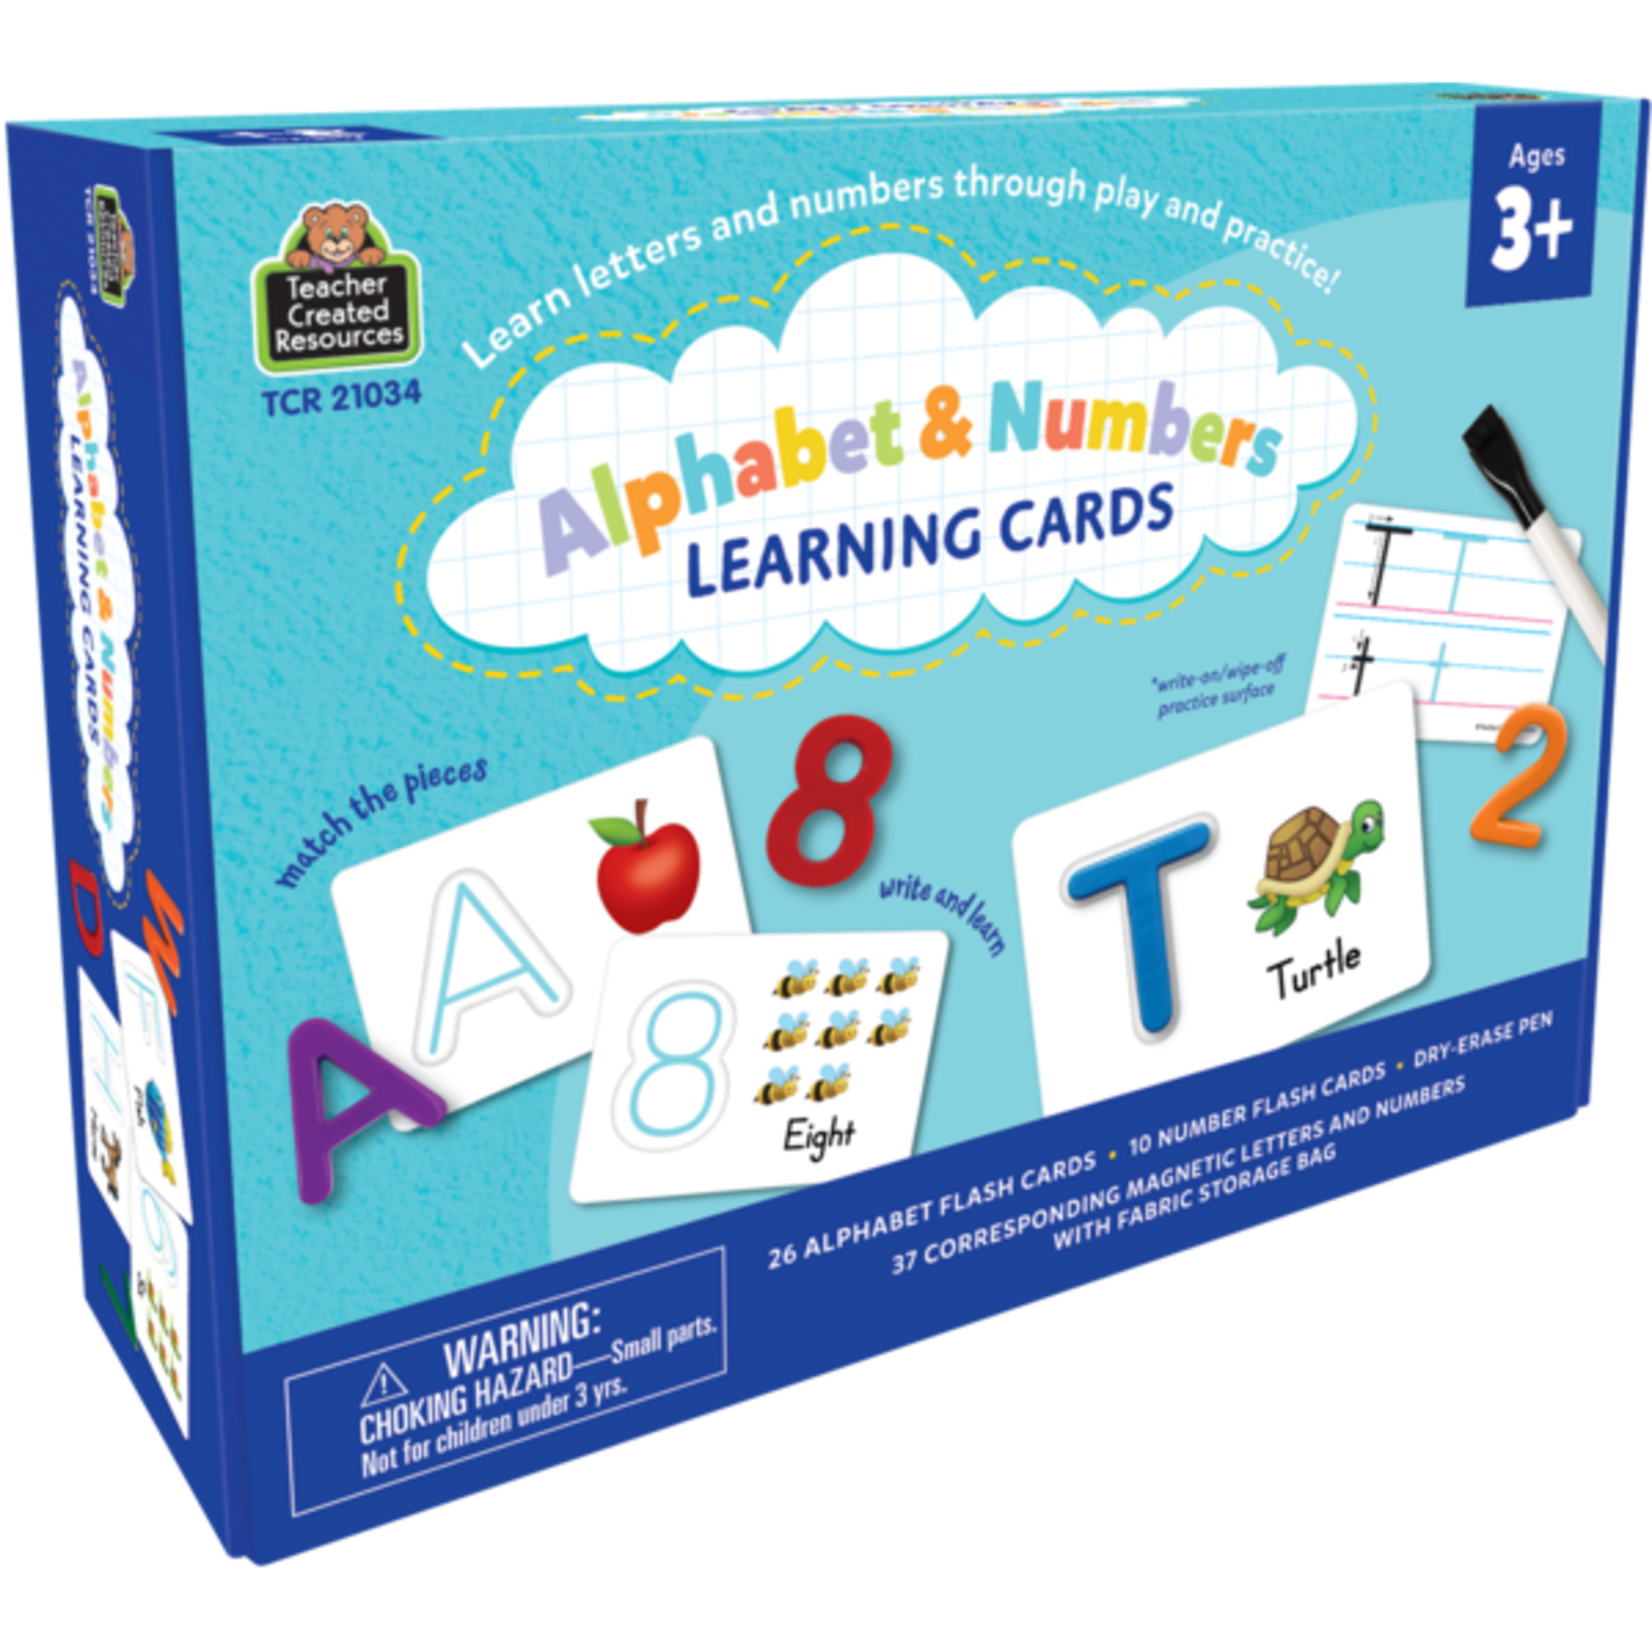 TEACHER CREATED RESOURCES Alphabet & Numbers Learning Cards